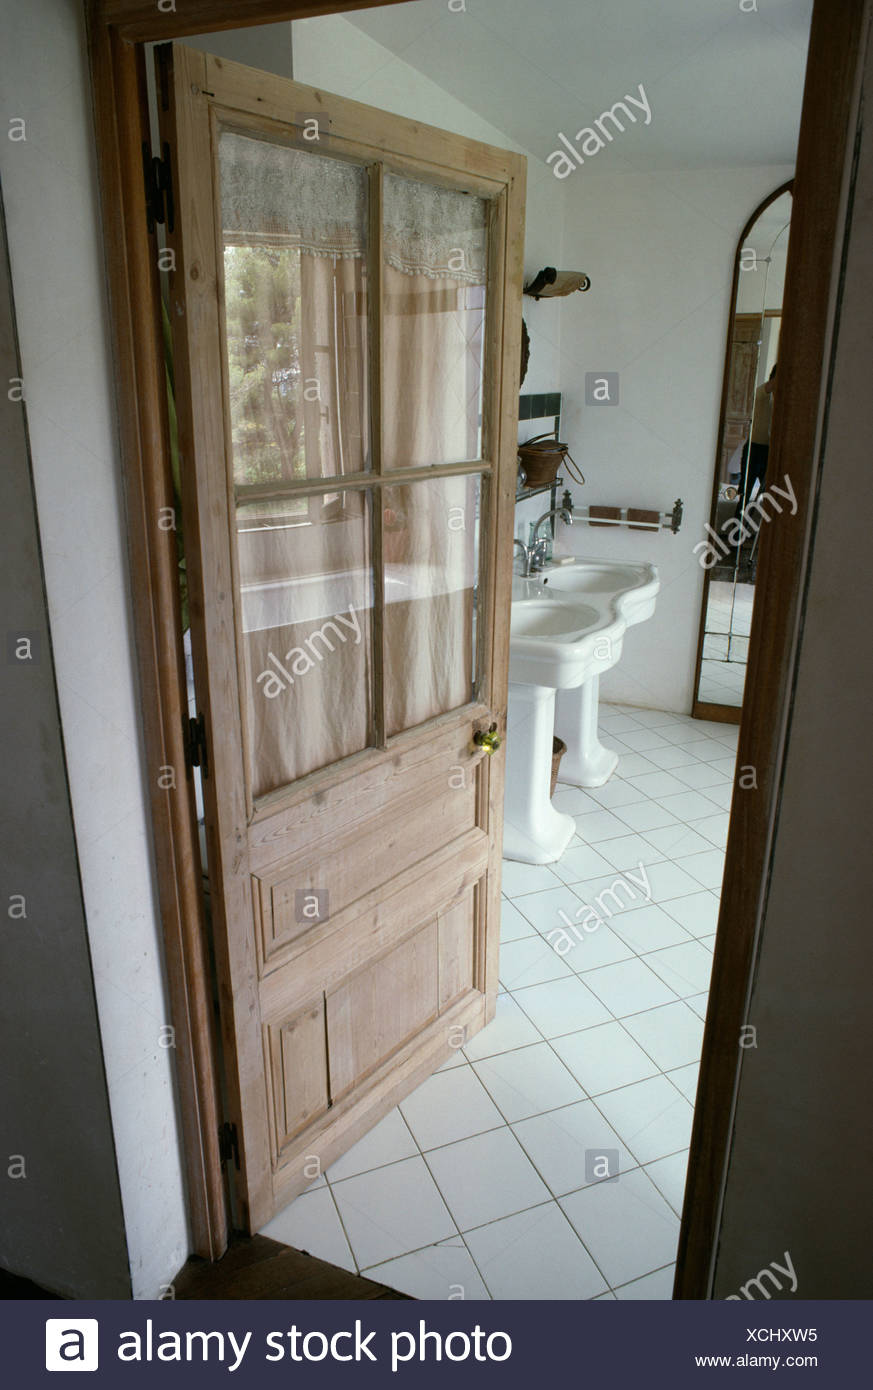 Open Half Glazed Wooden Door To Dining Room With White Tiled